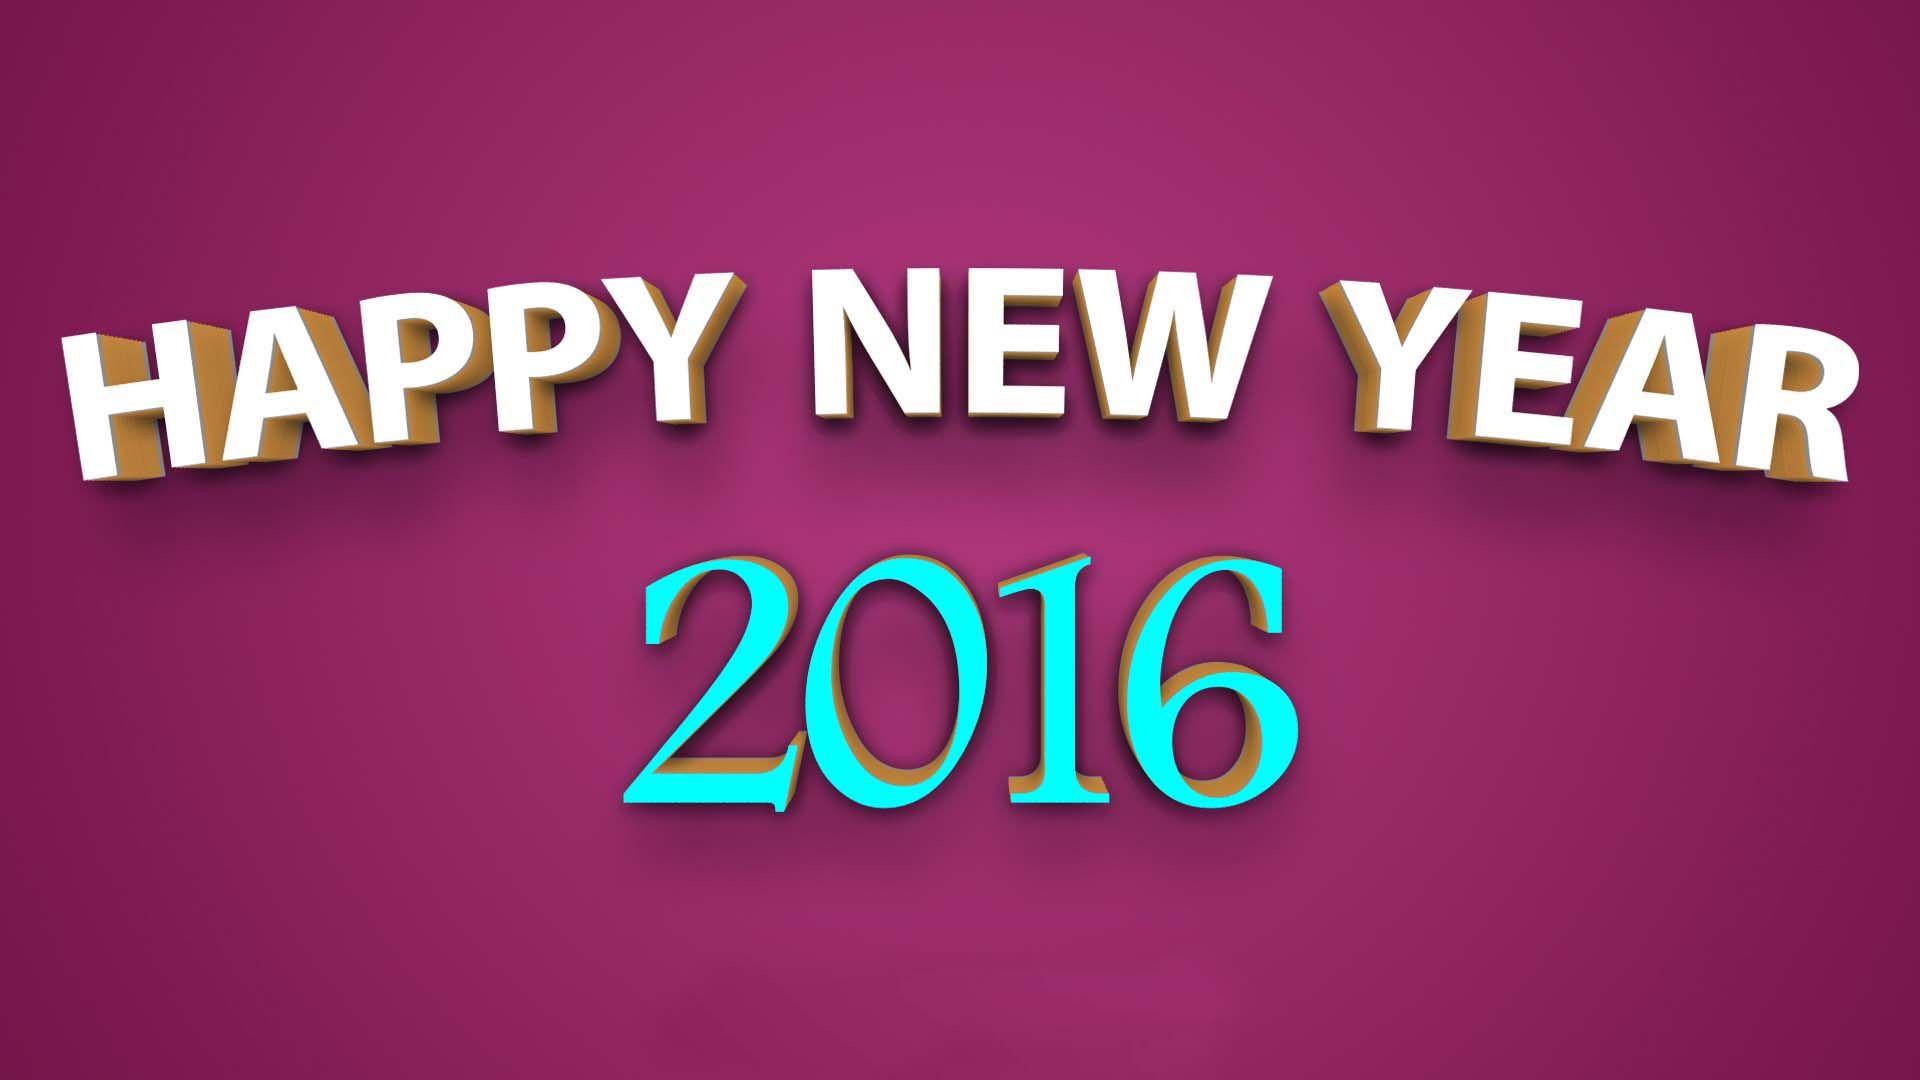 Happy New Year SMS And HD Wallpaper Free Download And Share